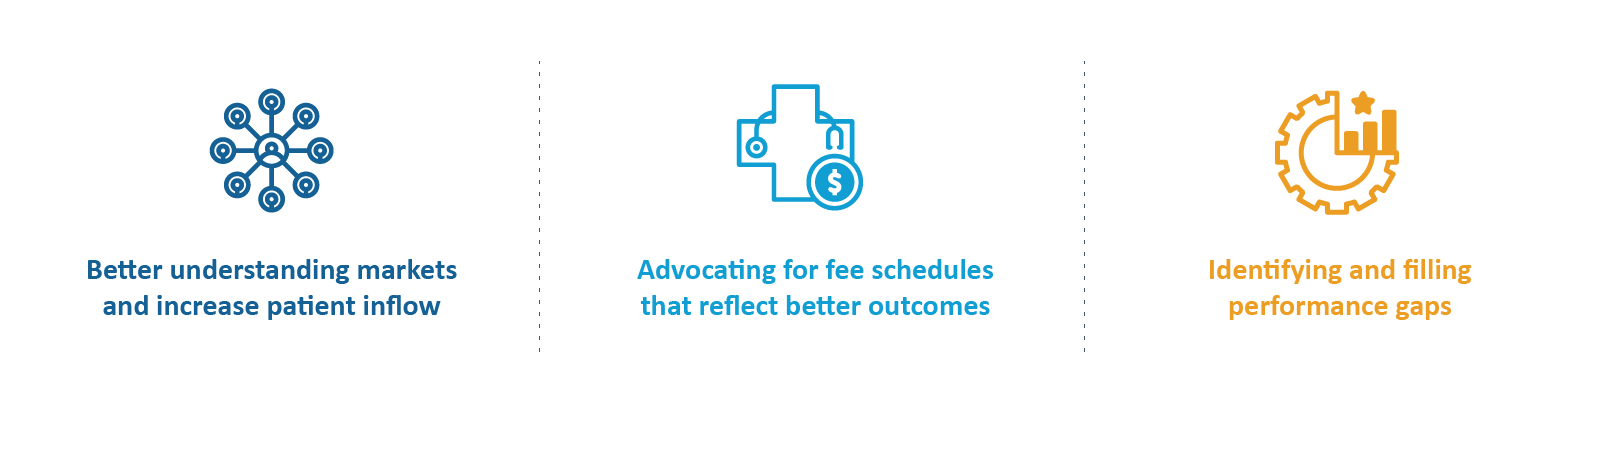 Better understanding markets and increase patient inflow Advocating for fee schedules that reflect better outcomes Identifying and filling performance gaps